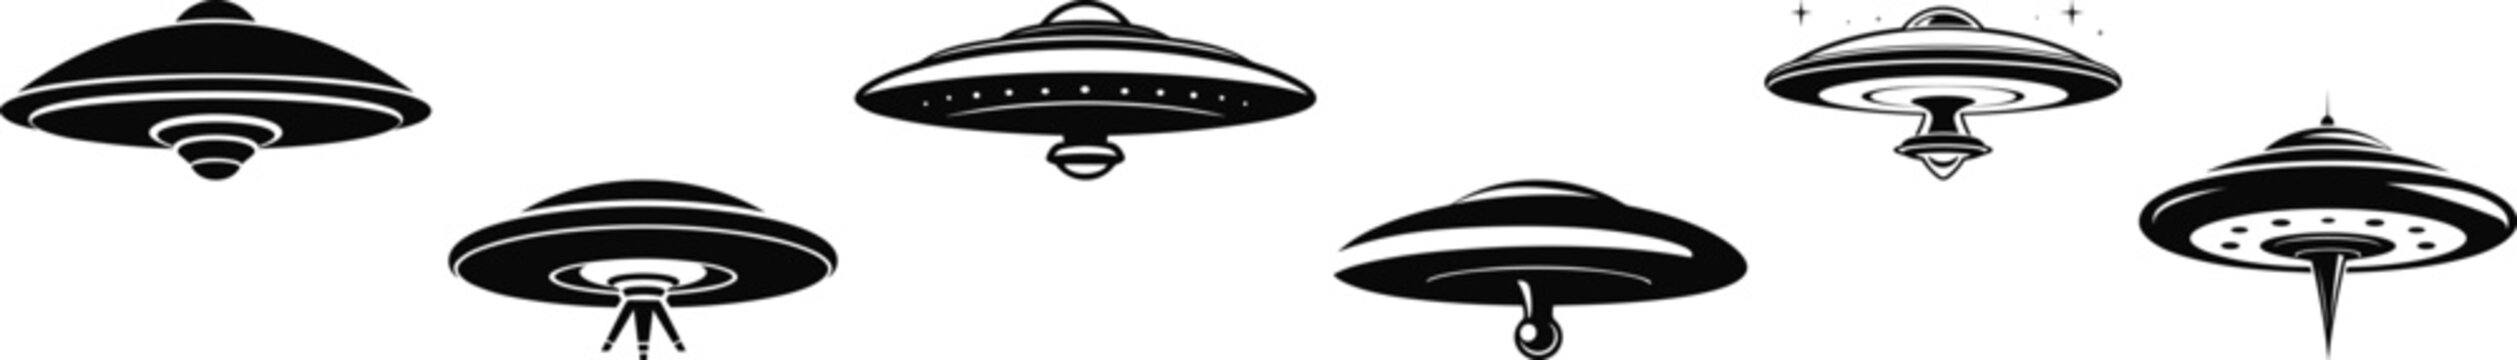 Ufo alien spacecraft black isolated silhouette vector collection